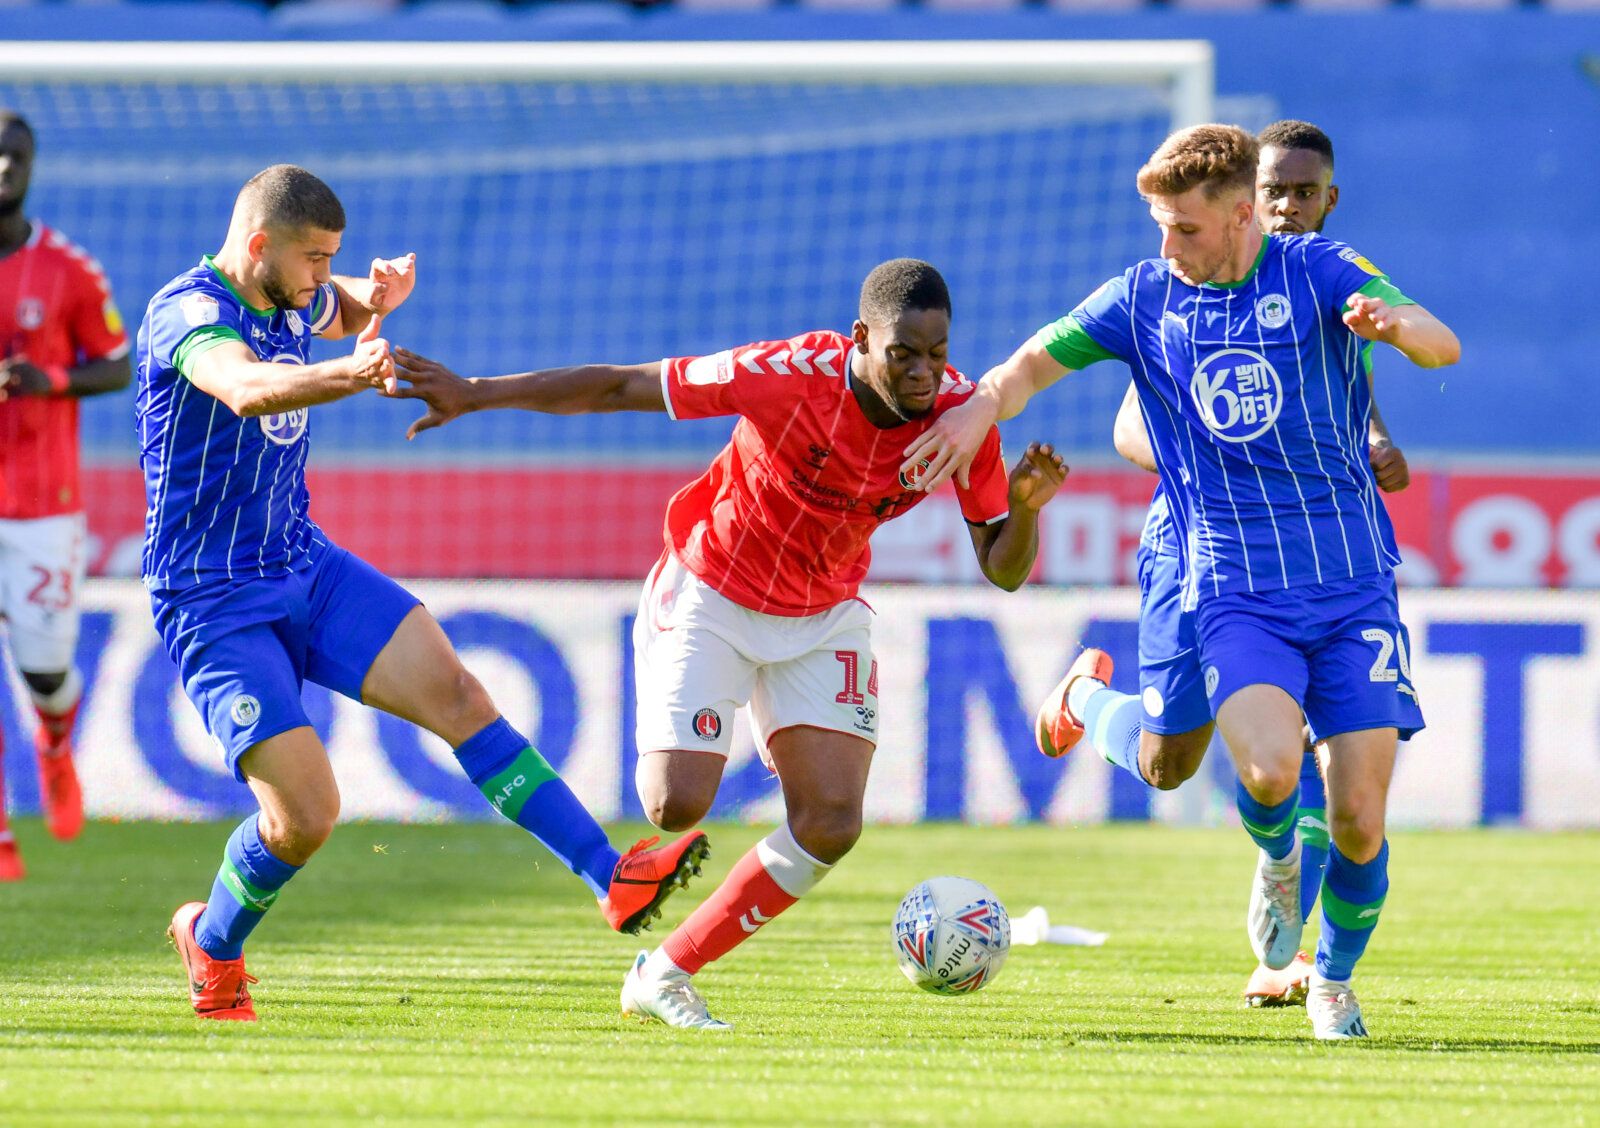 Soccer Football - Championship - Wigan Athletic v Charlton Athletic - DW Stadium, Wigan, Britain - September 21, 2019   Charlton Athletic's Jonathan Leko in action with Wigan Athletic's Sam Morsy and Joe Williams   Action Images/Paul Burrows    EDITORIAL USE ONLY. No use with unauthorized audio, video, data, fixture lists, club/league logos or "live" services. Online in-match use limited to 75 images, no video emulation. No use in betting, games or single club/league/player publications.  Please